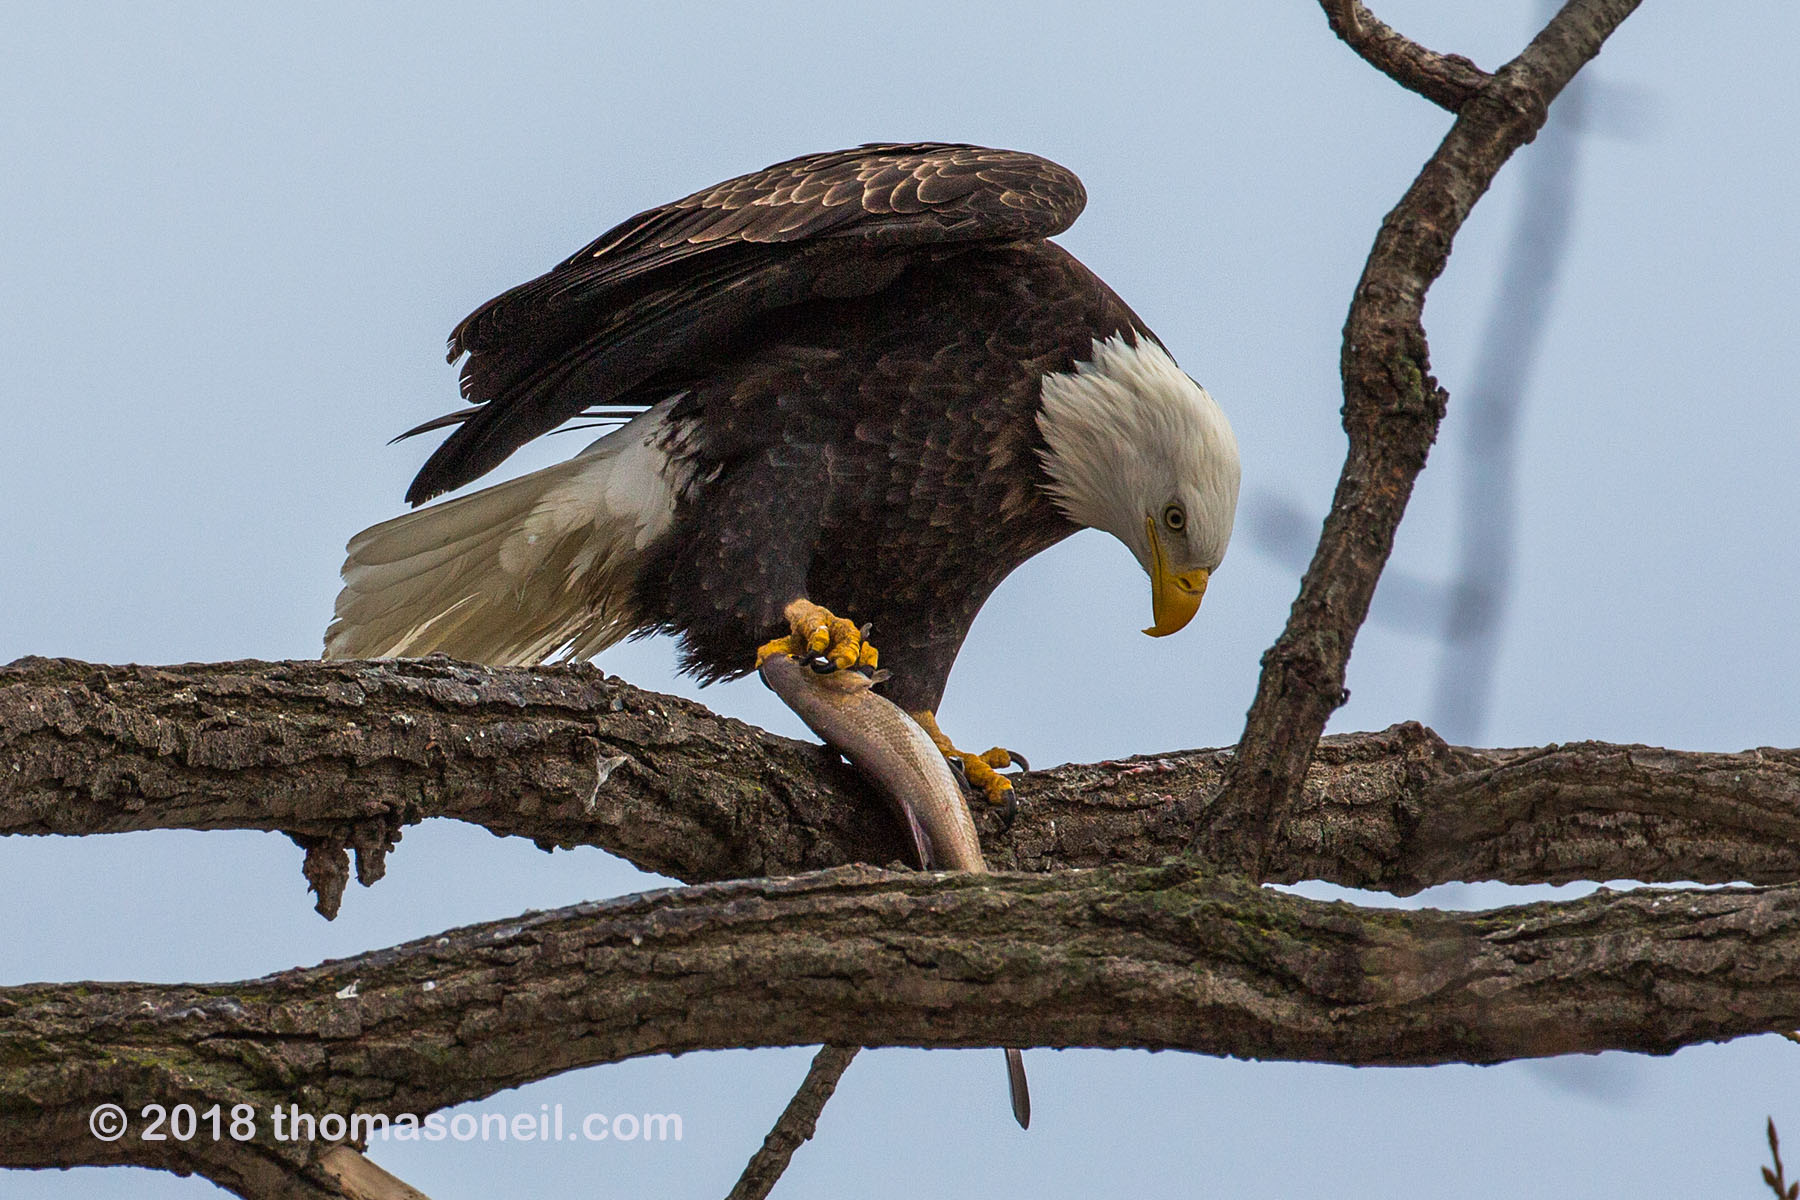 Bald eagle eating fish, 5 of 7 in sequence, Keokuk, Iowa.  Click for next photo.